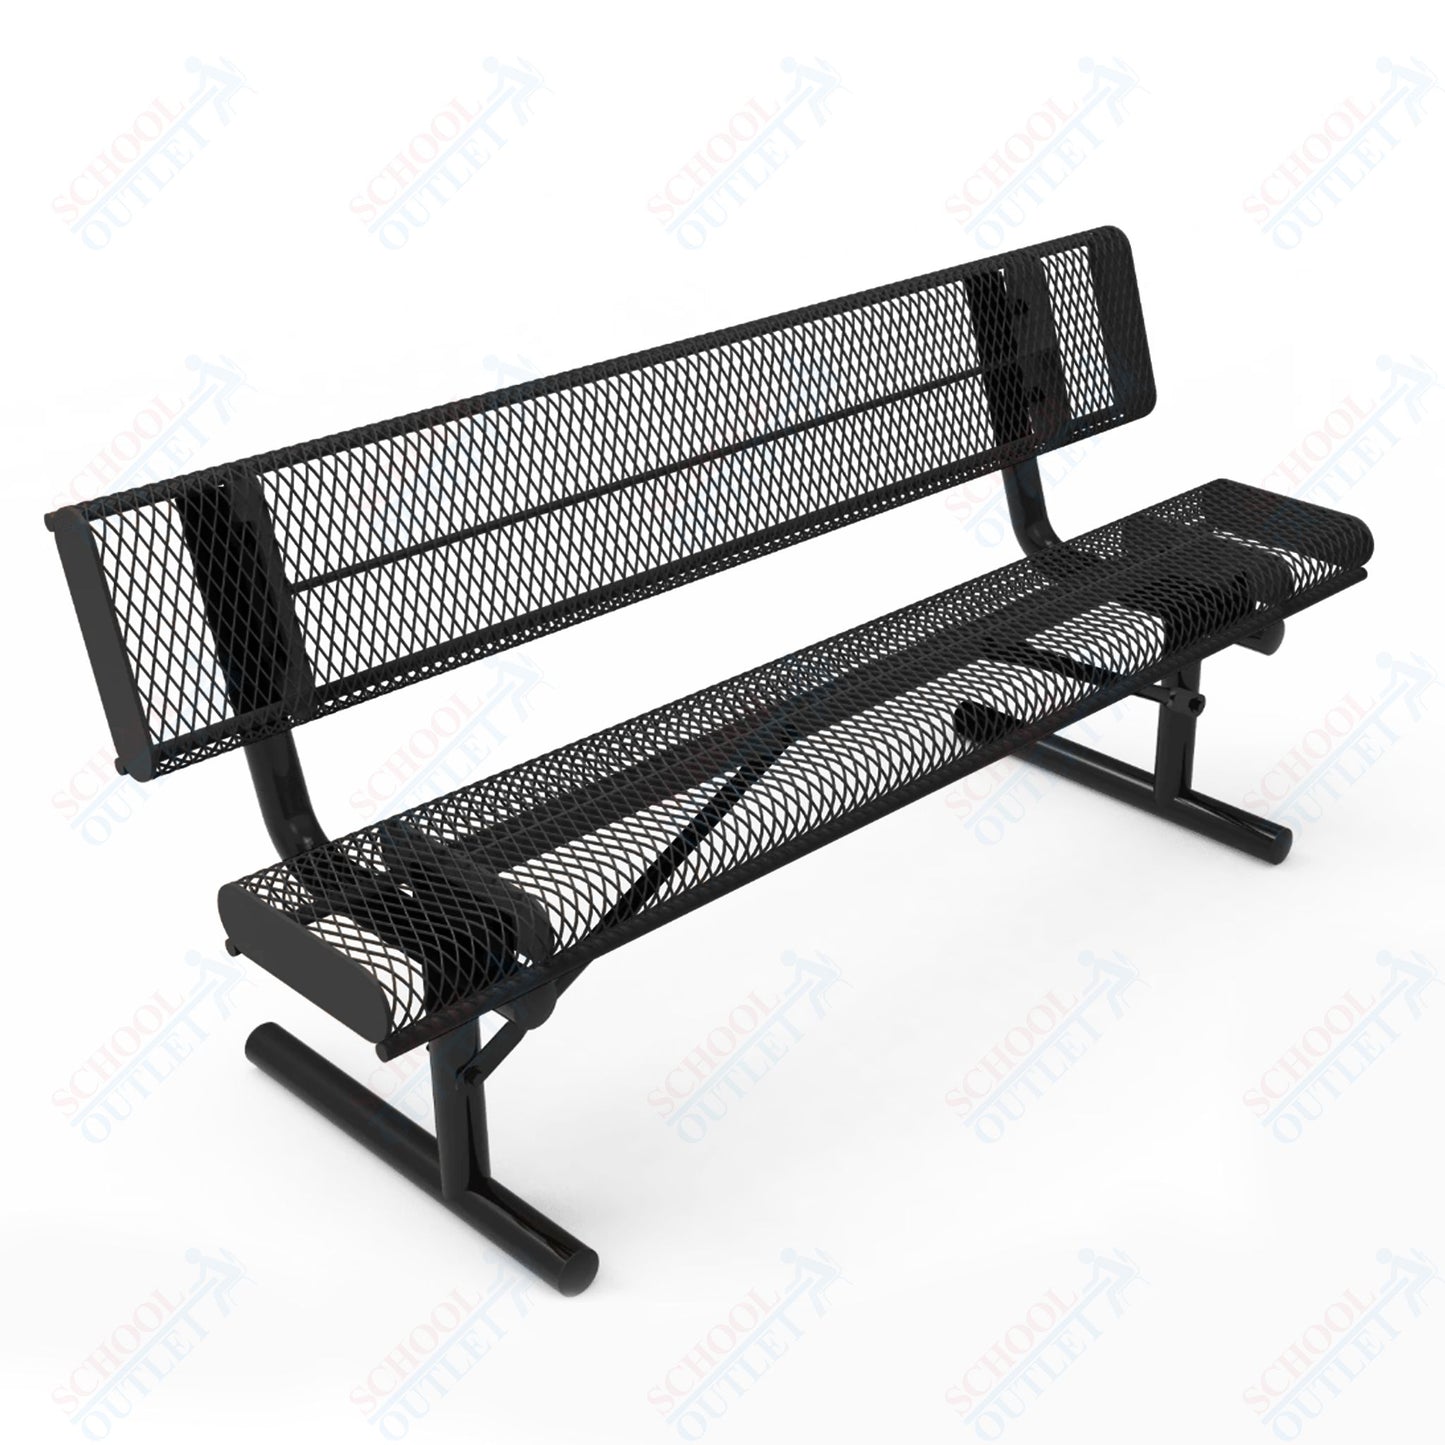 MyTcoat - Rolled Edges Outdoor Portable Bench with Back 4' L (MYT-BRE04-18)